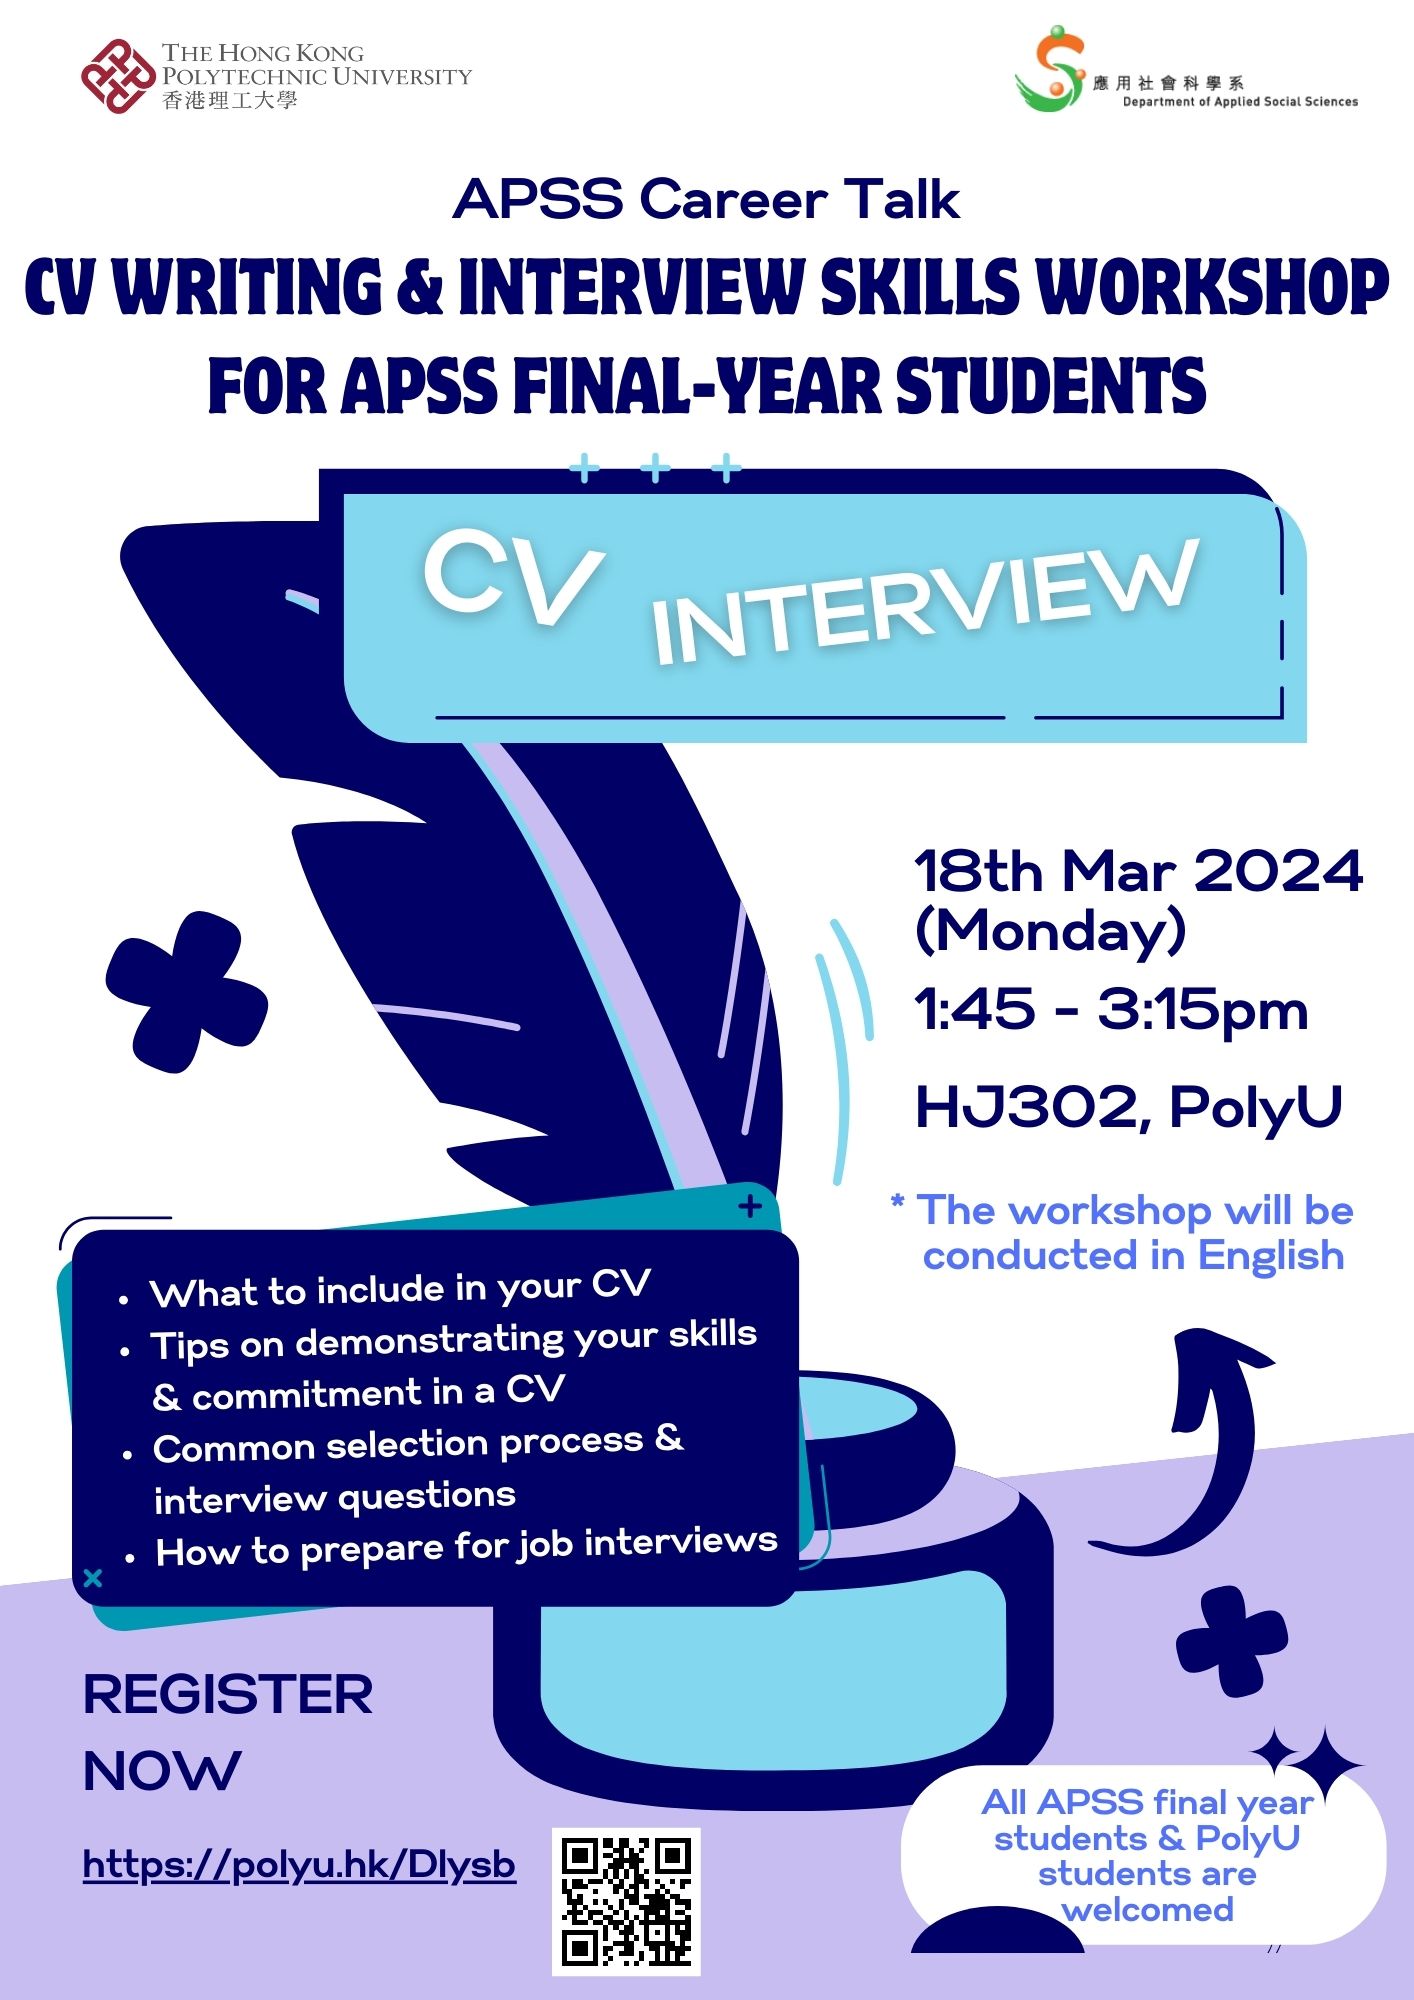 CV Writing and Interview Skills Workshop for APSS final-year students